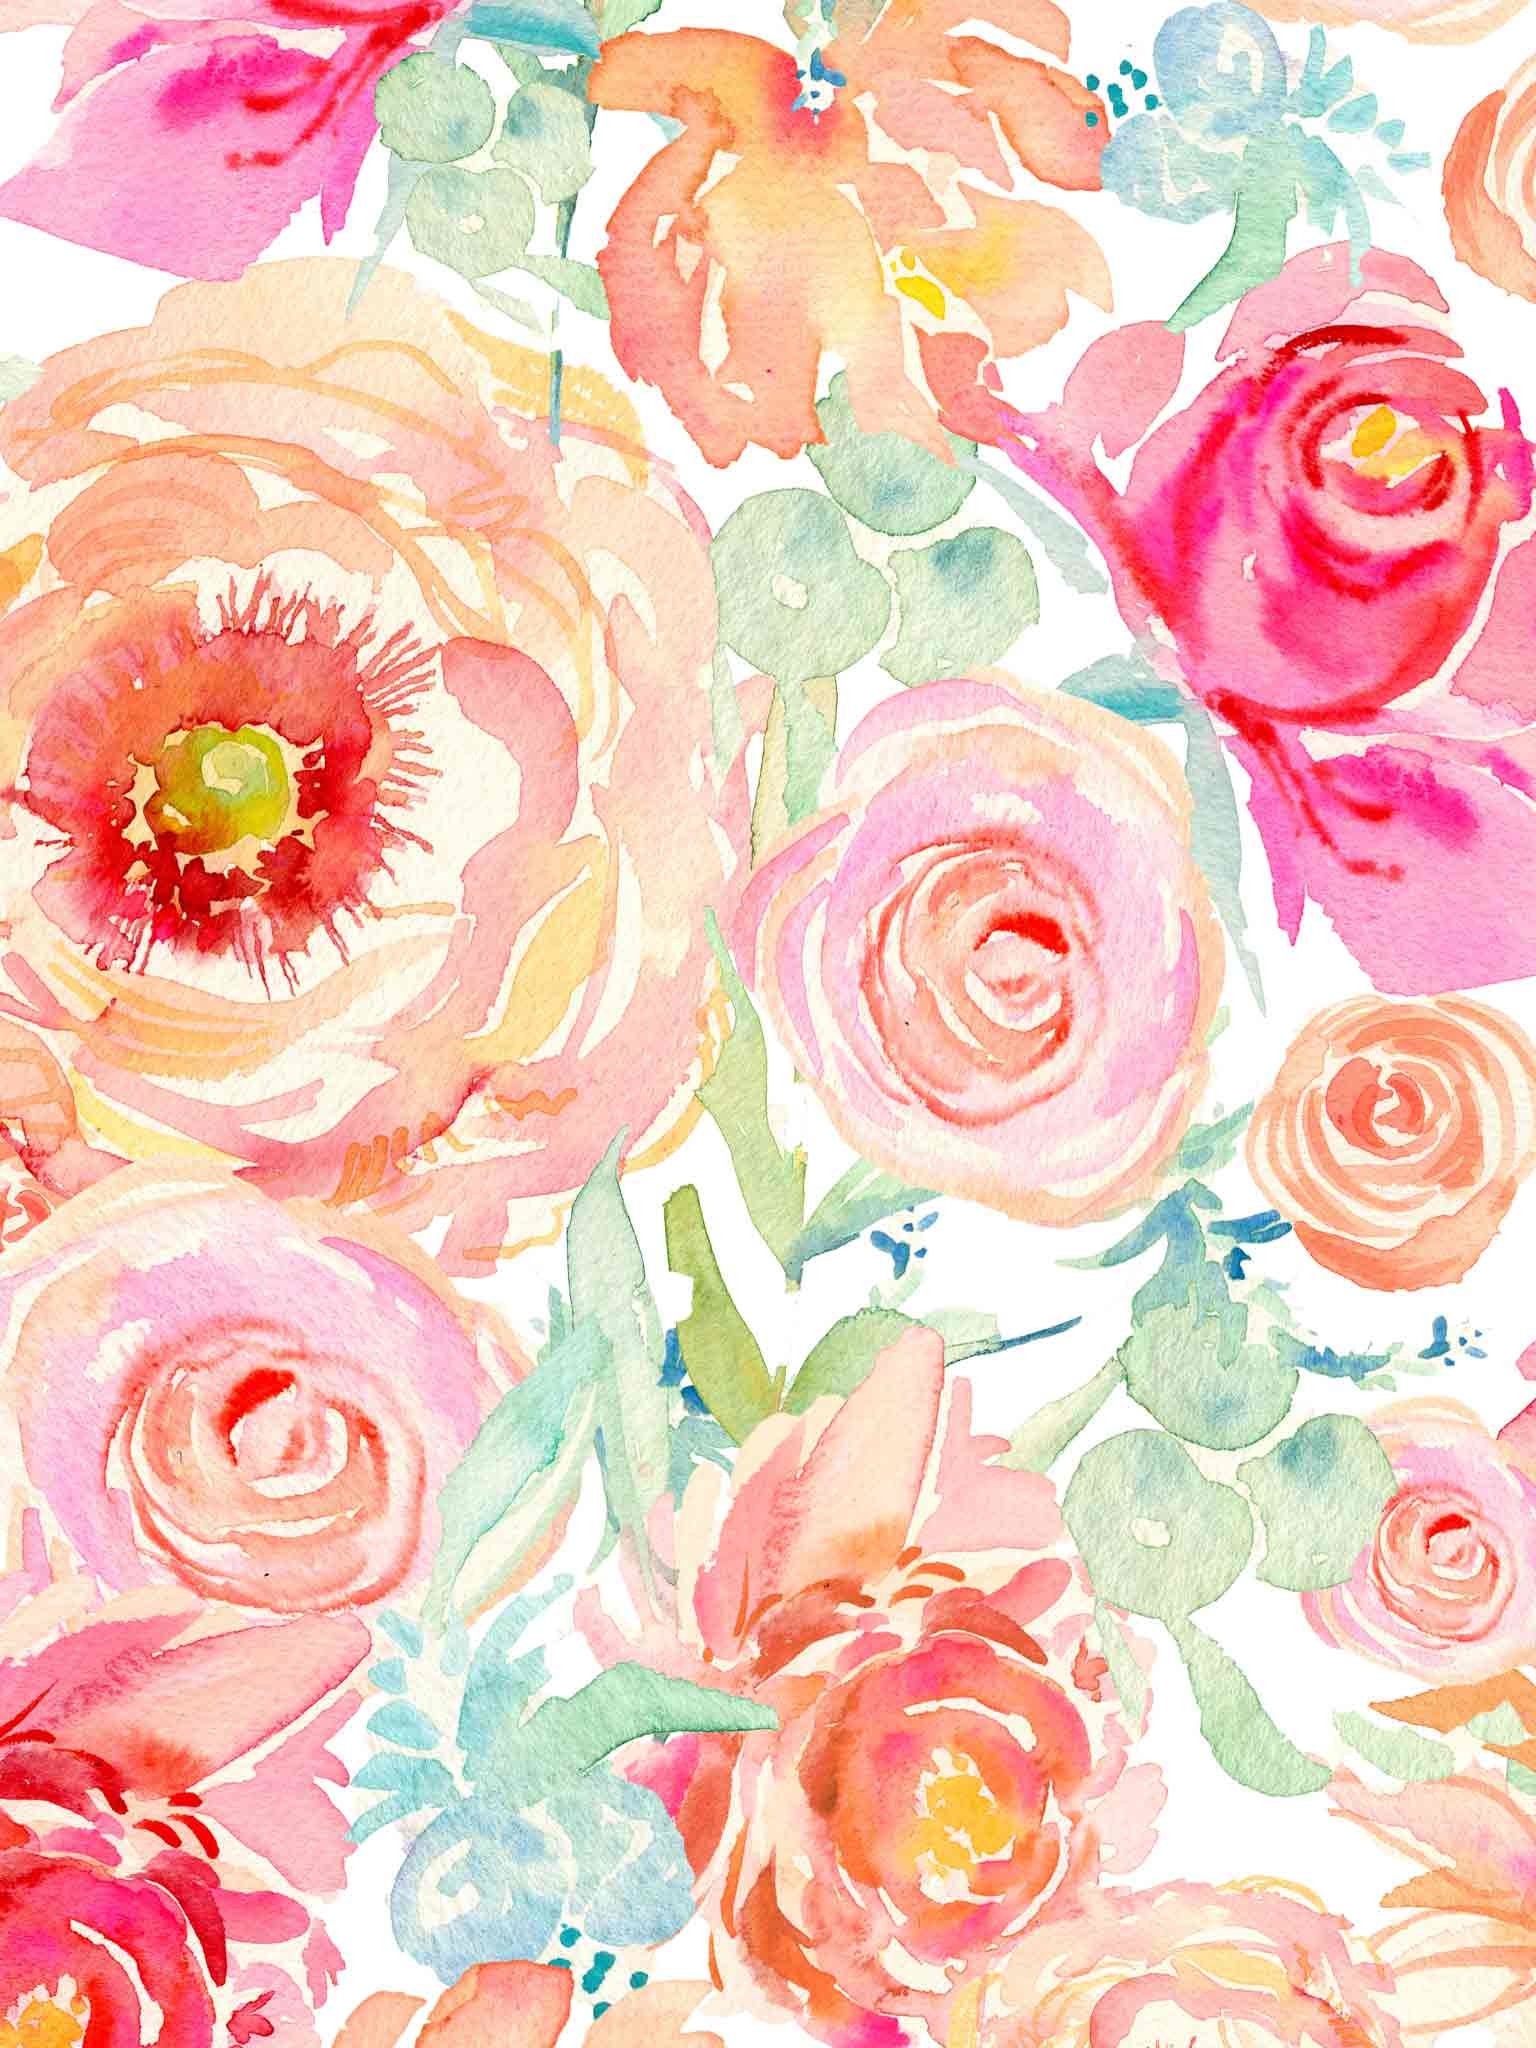 Floral Watercolor Wallpaper - Watercolor Floral Iphone Background - HD Wallpaper 